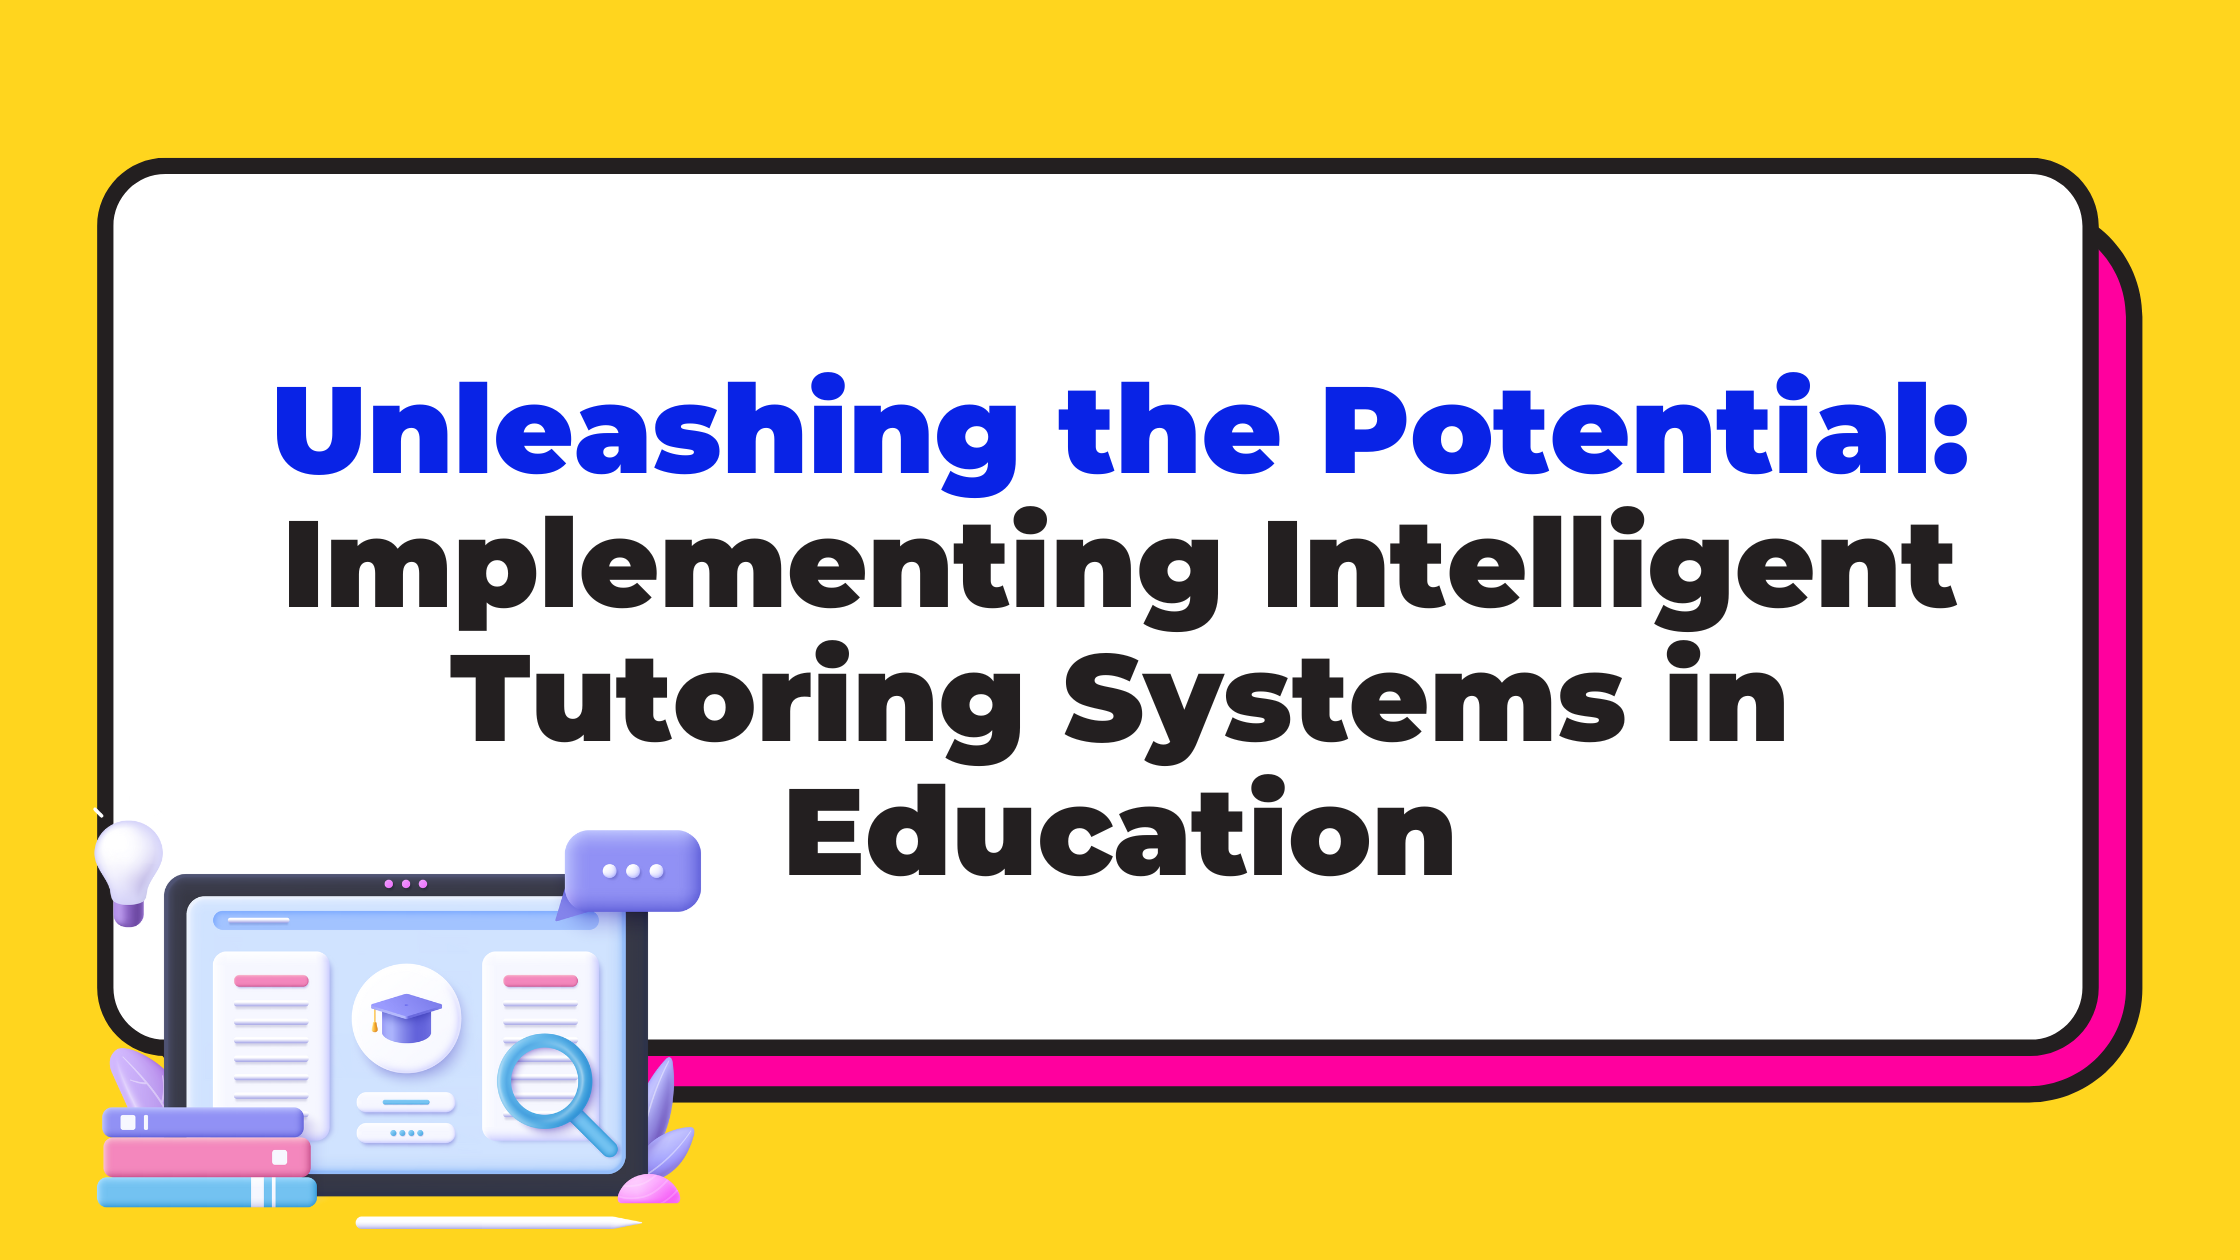 Unleashing the Potential: Implementing Intelligent Tutoring Systems in Education